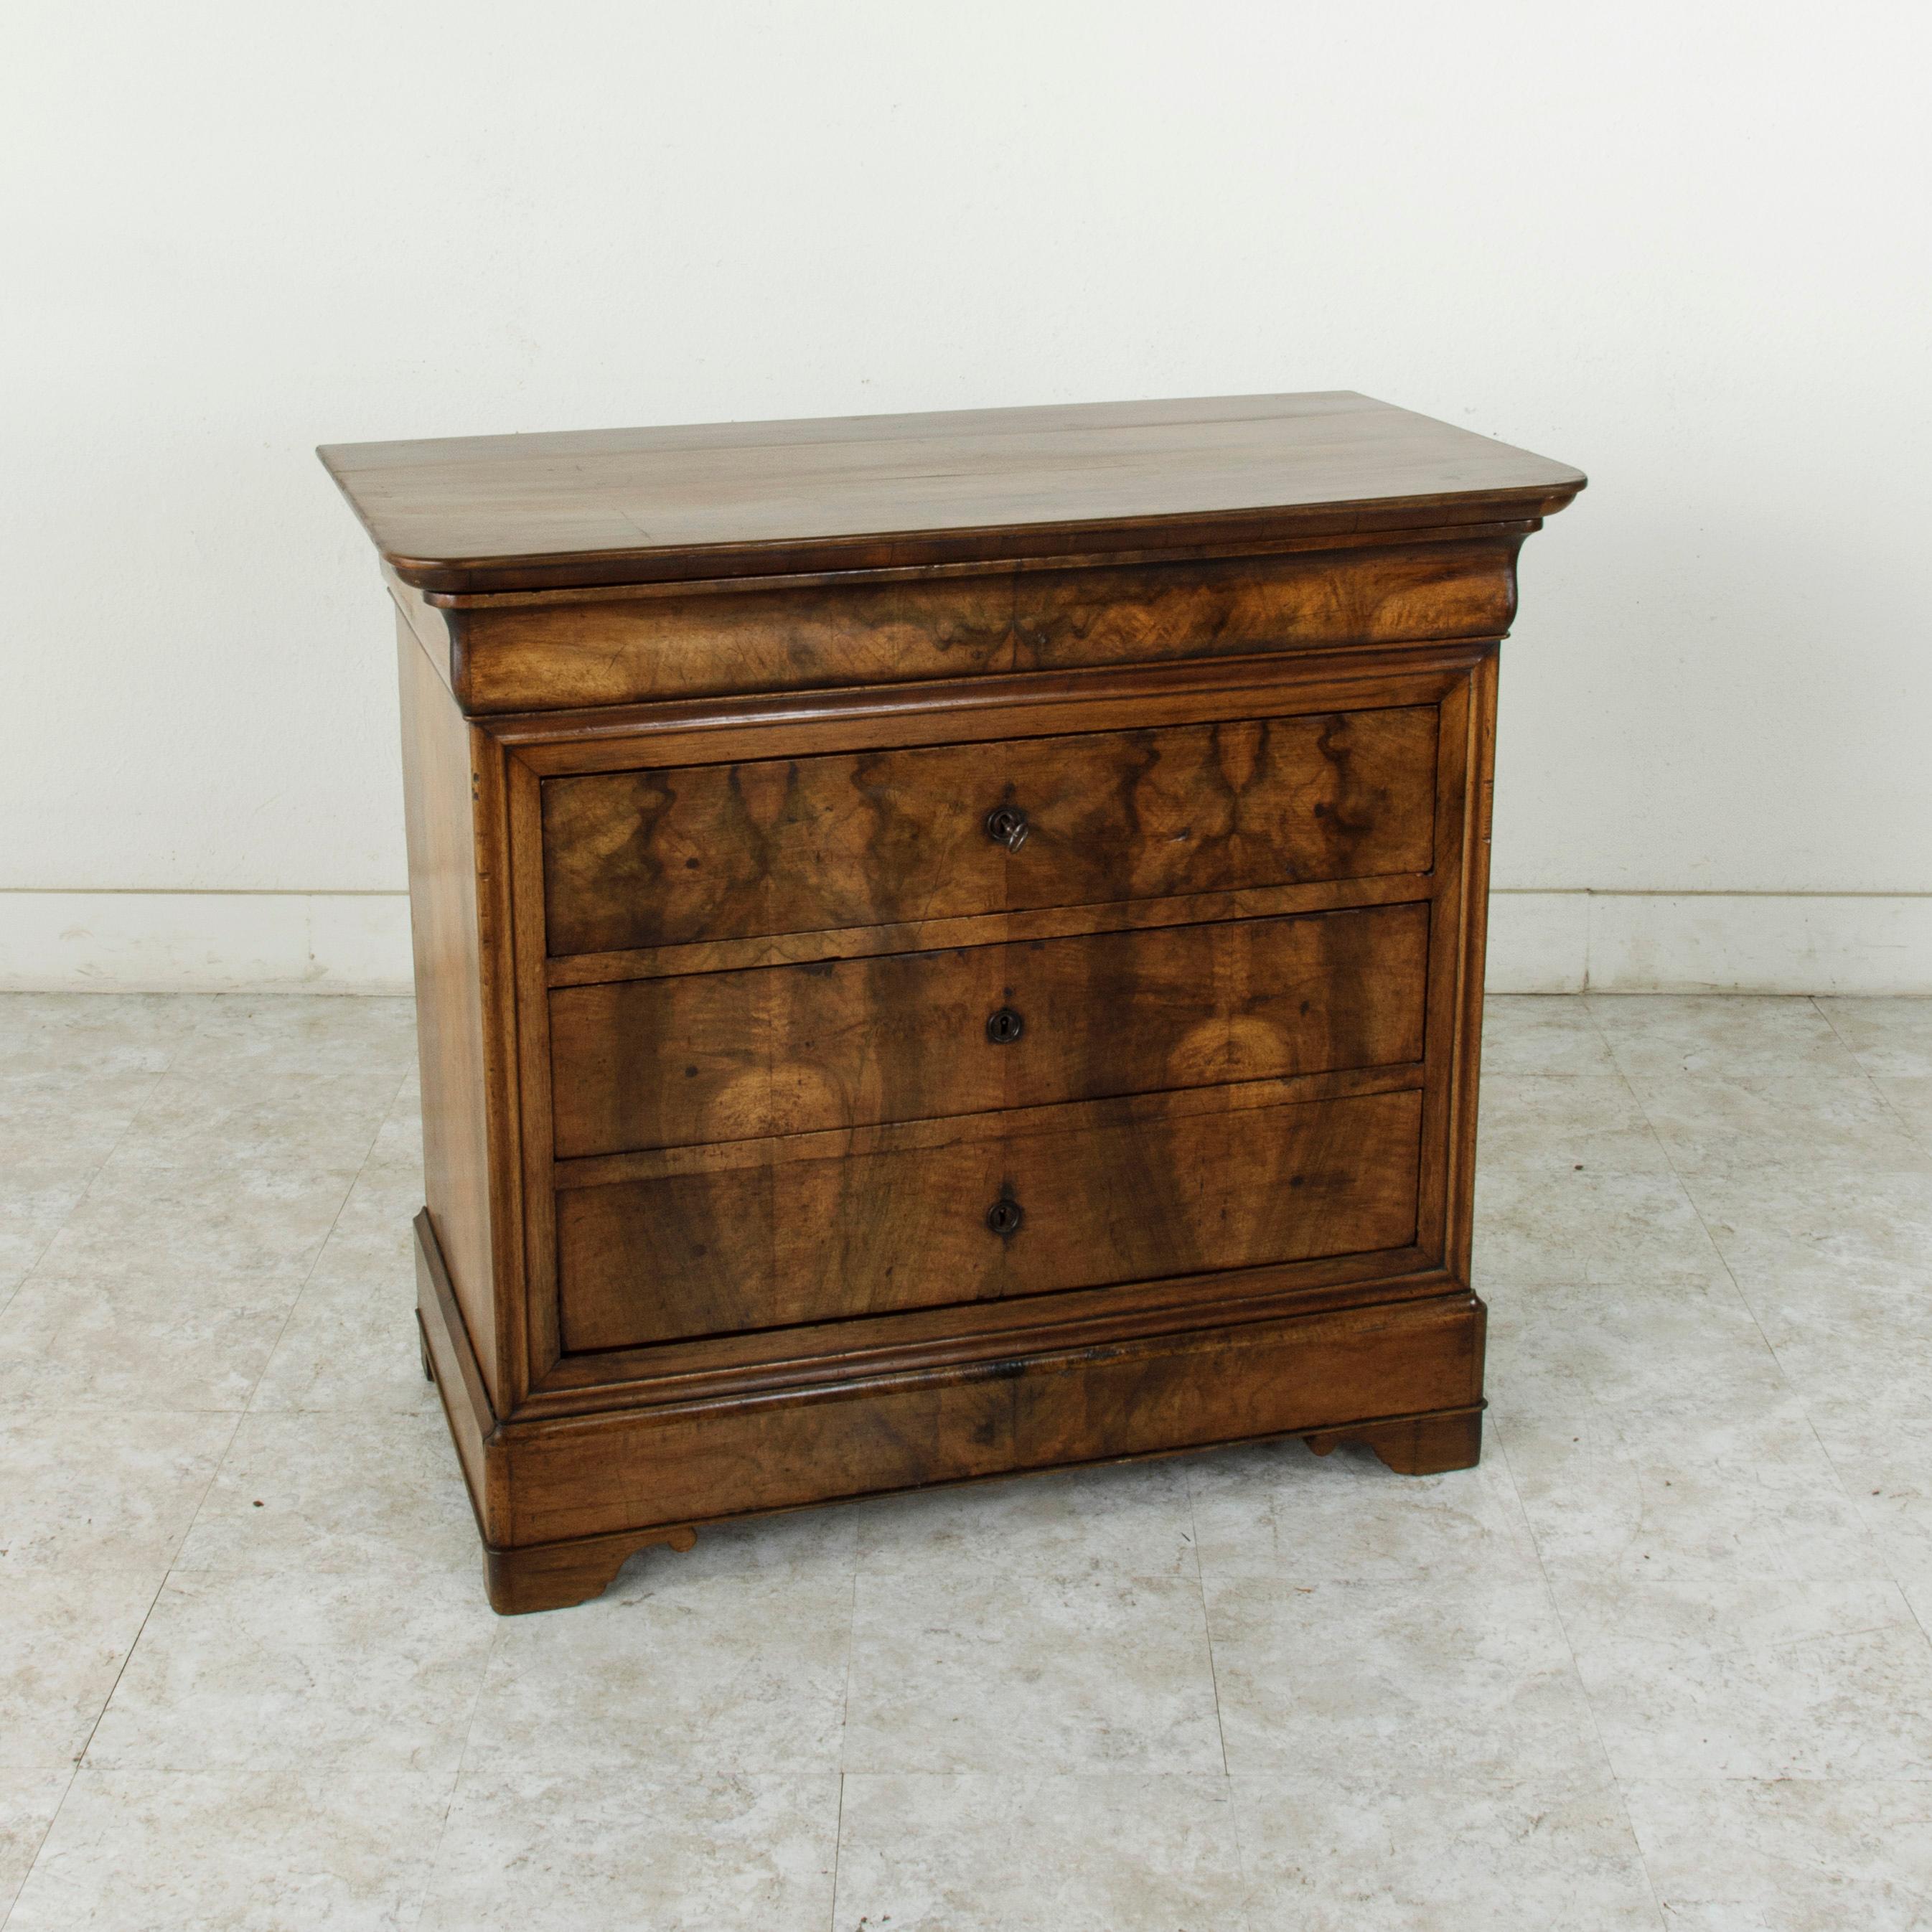 Rare for its smaller scale with a 41 inch width, this quintessential Louis Philippe period commode or chest of drawers displays the exemplary craftsmanship of the early 19th century with a facade of book matched walnut and solid walnut panel sides